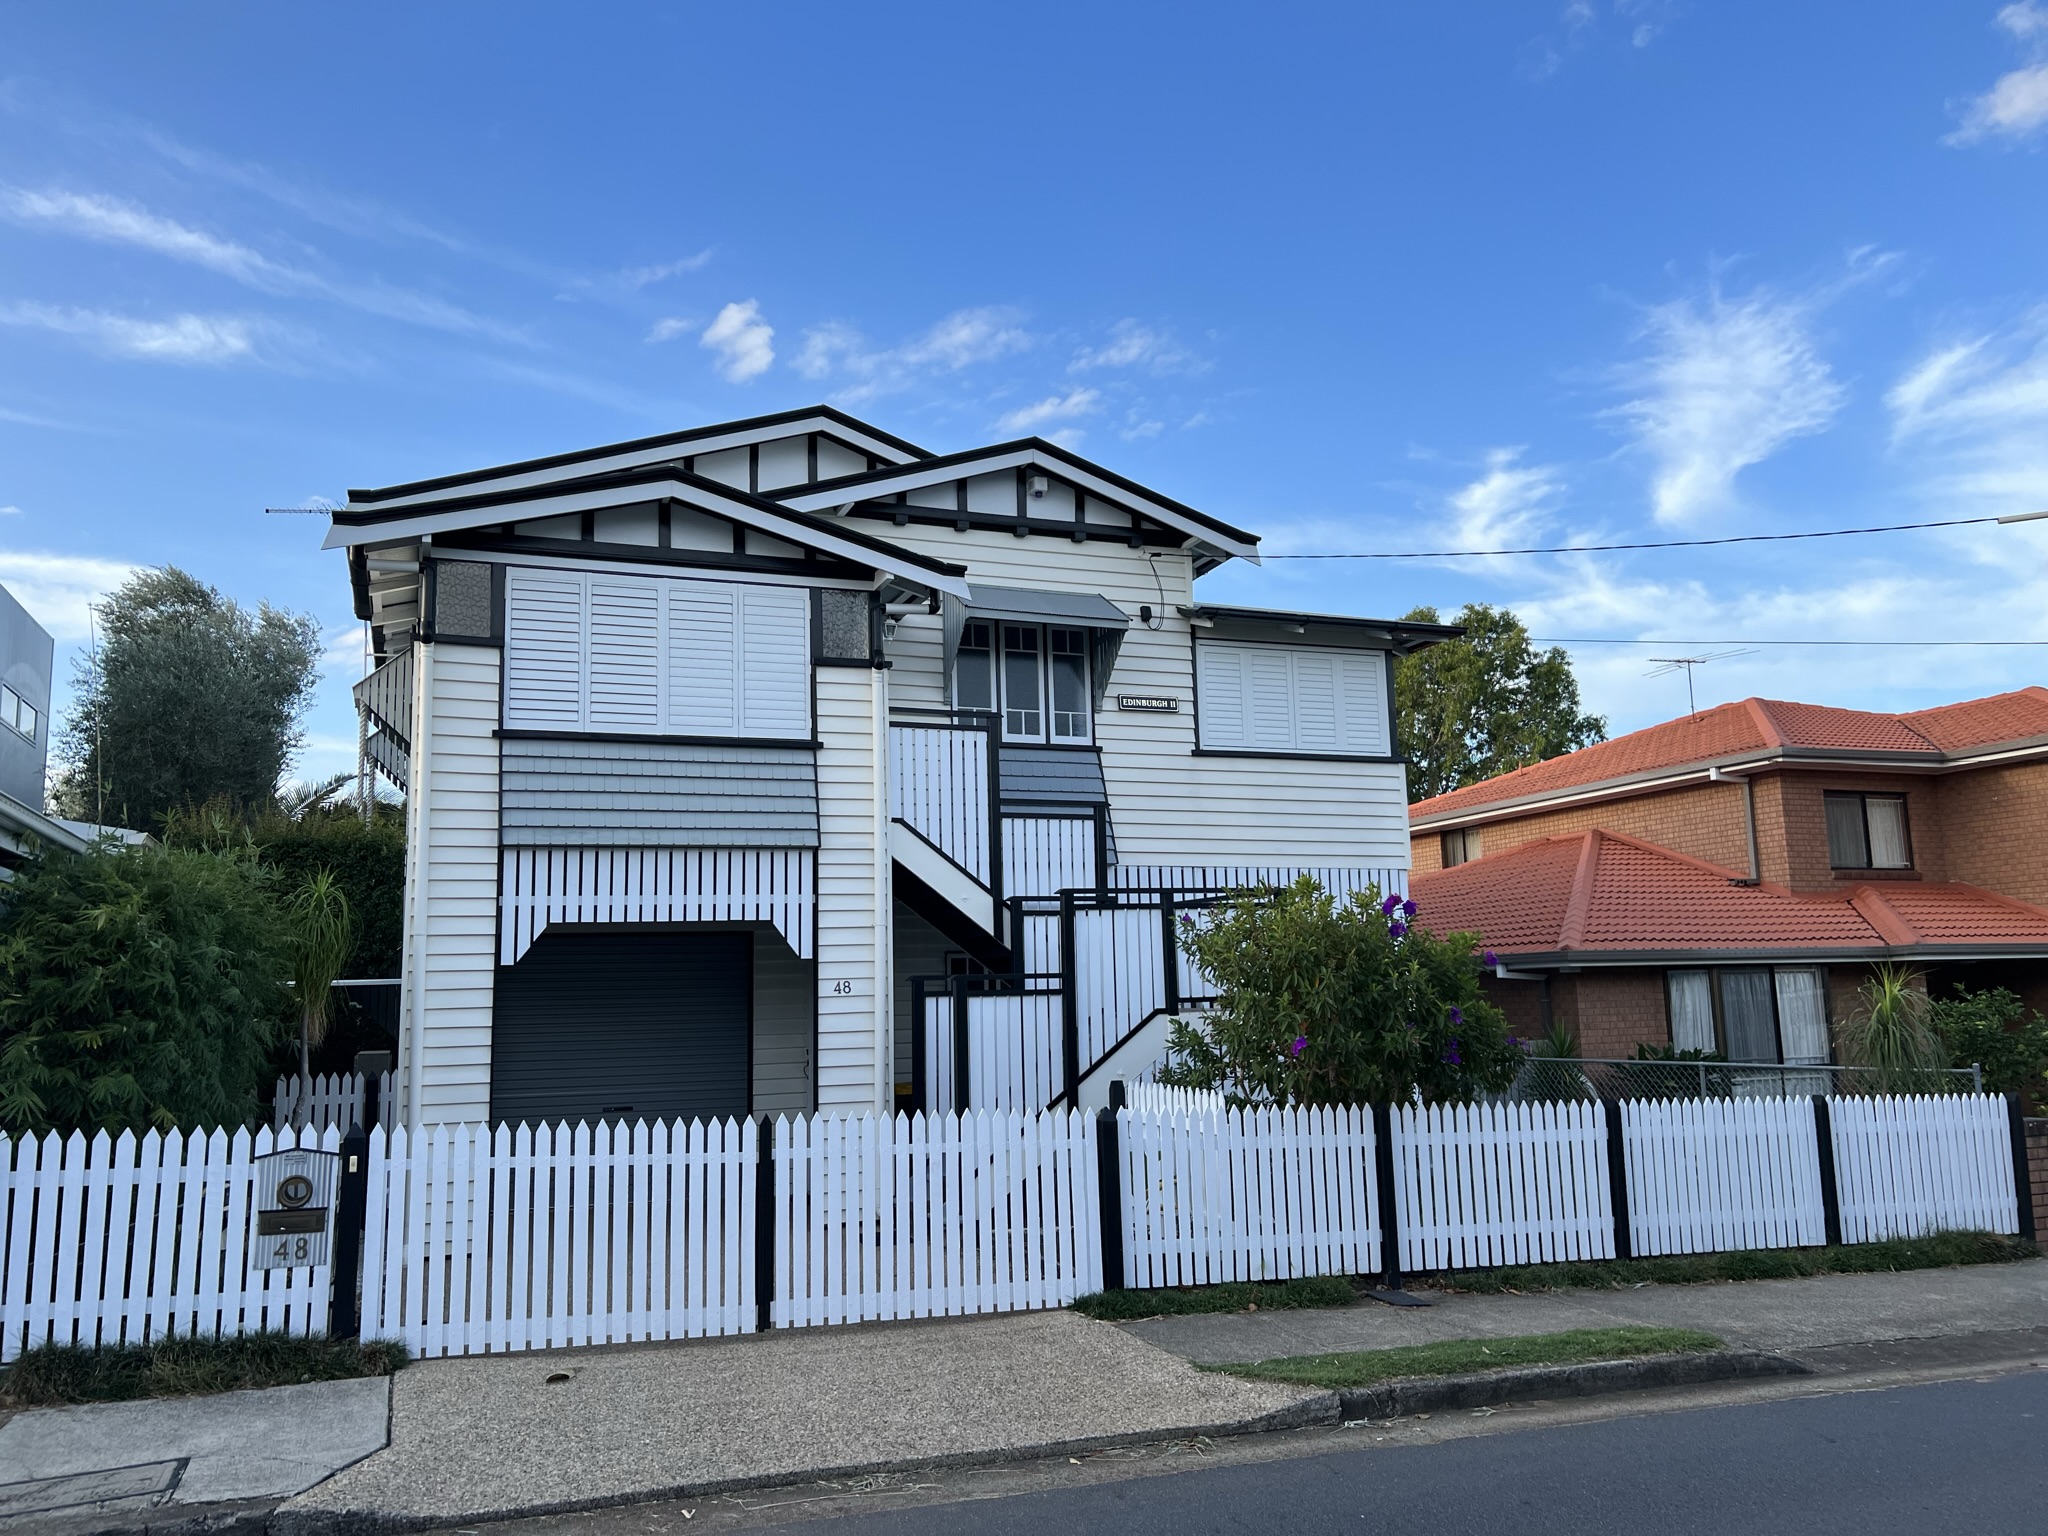 Queenslander – filled with light, colour and interest